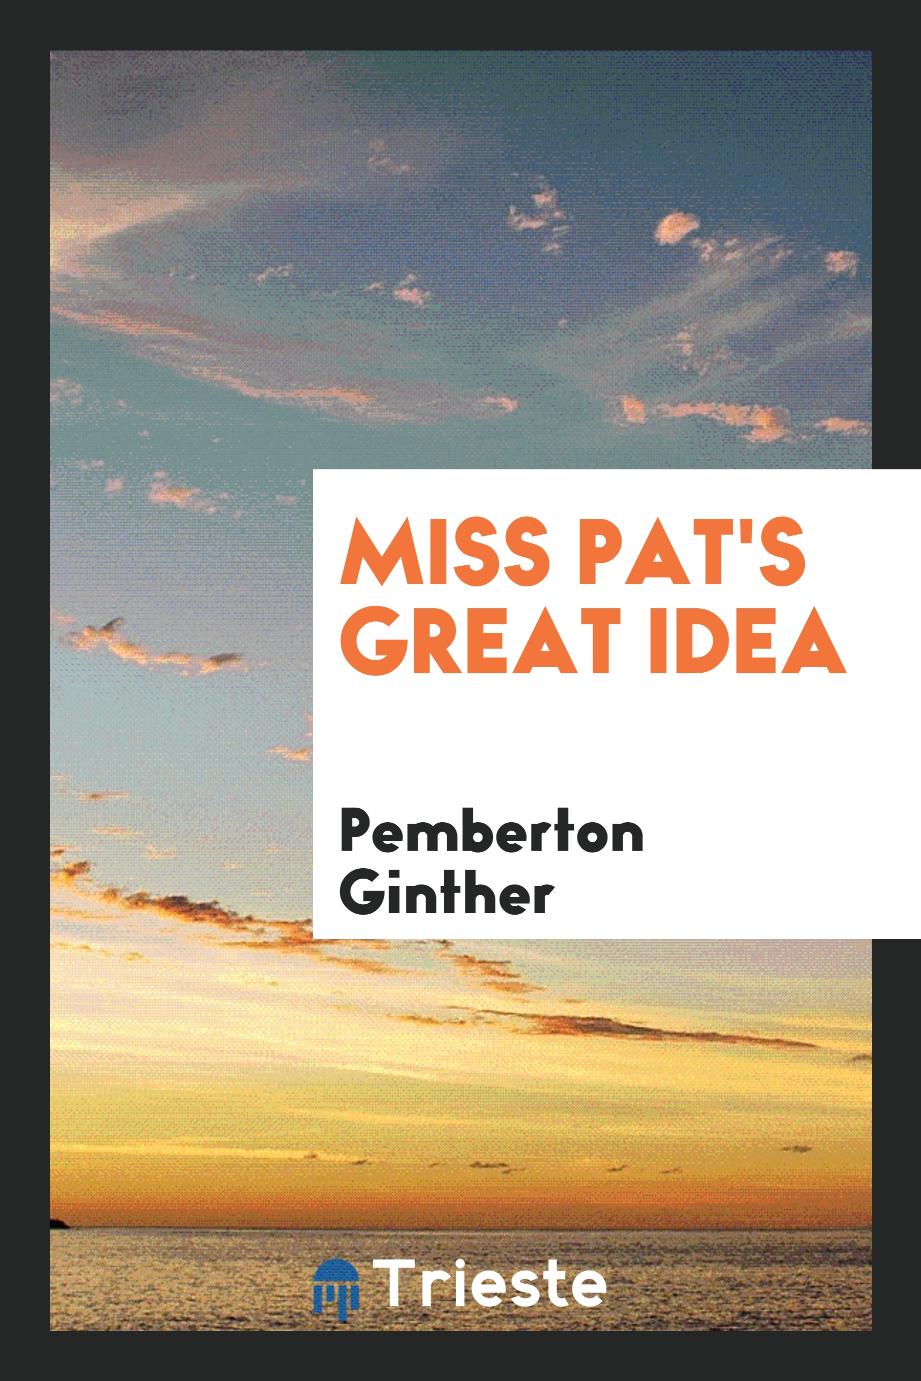 Pemberton Ginther - Miss Pat's great idea